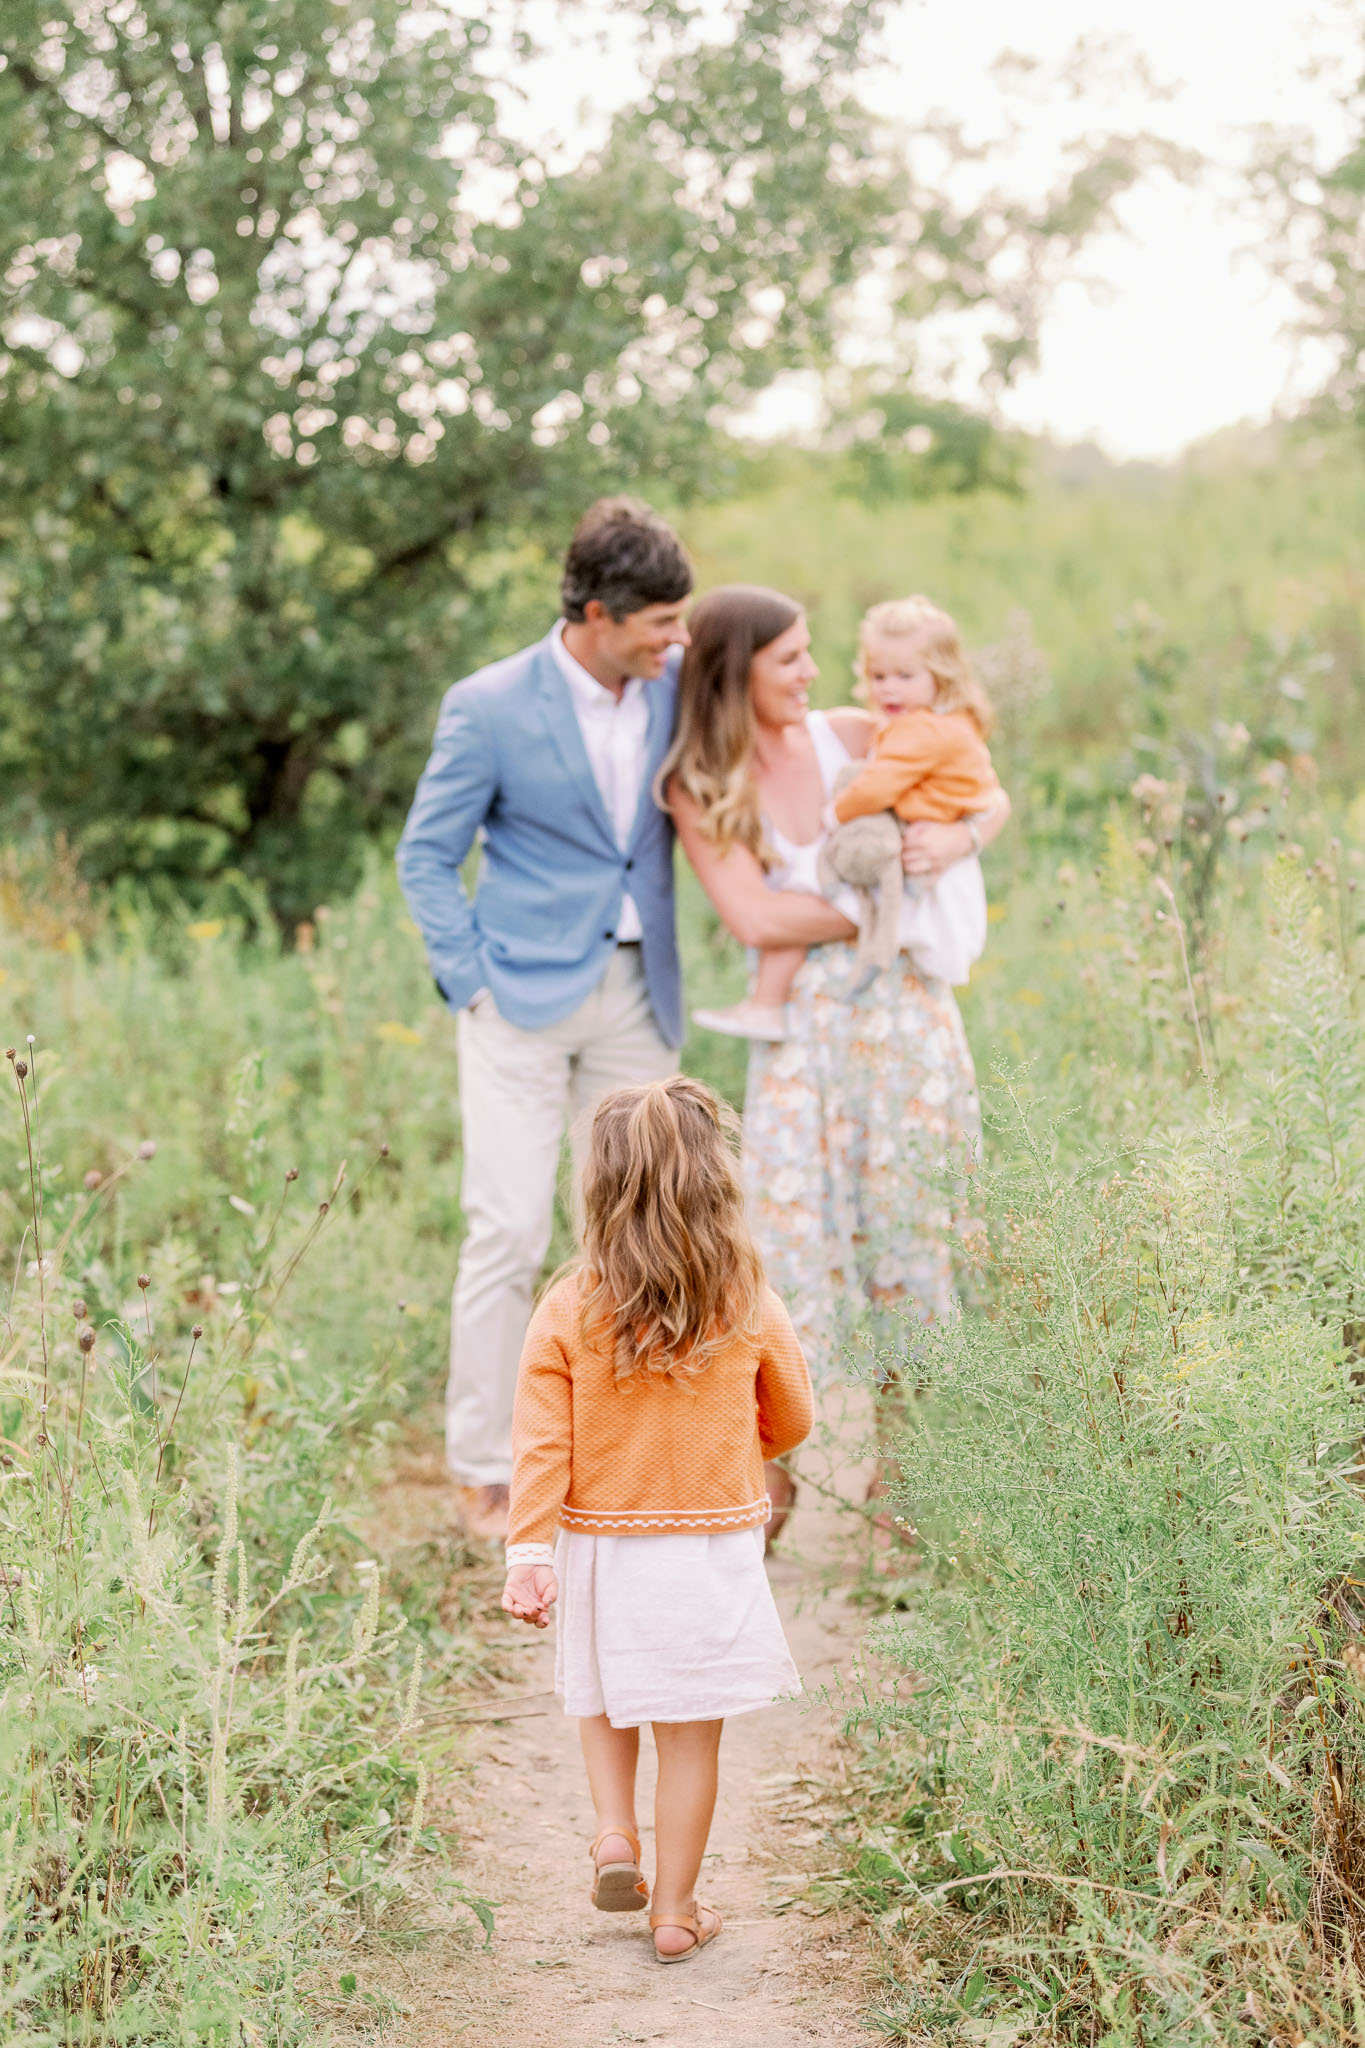 Light and Airy Chicago Naples Lifestyle Family Photographer – Mayslake Forest Preserve Family Photos-57